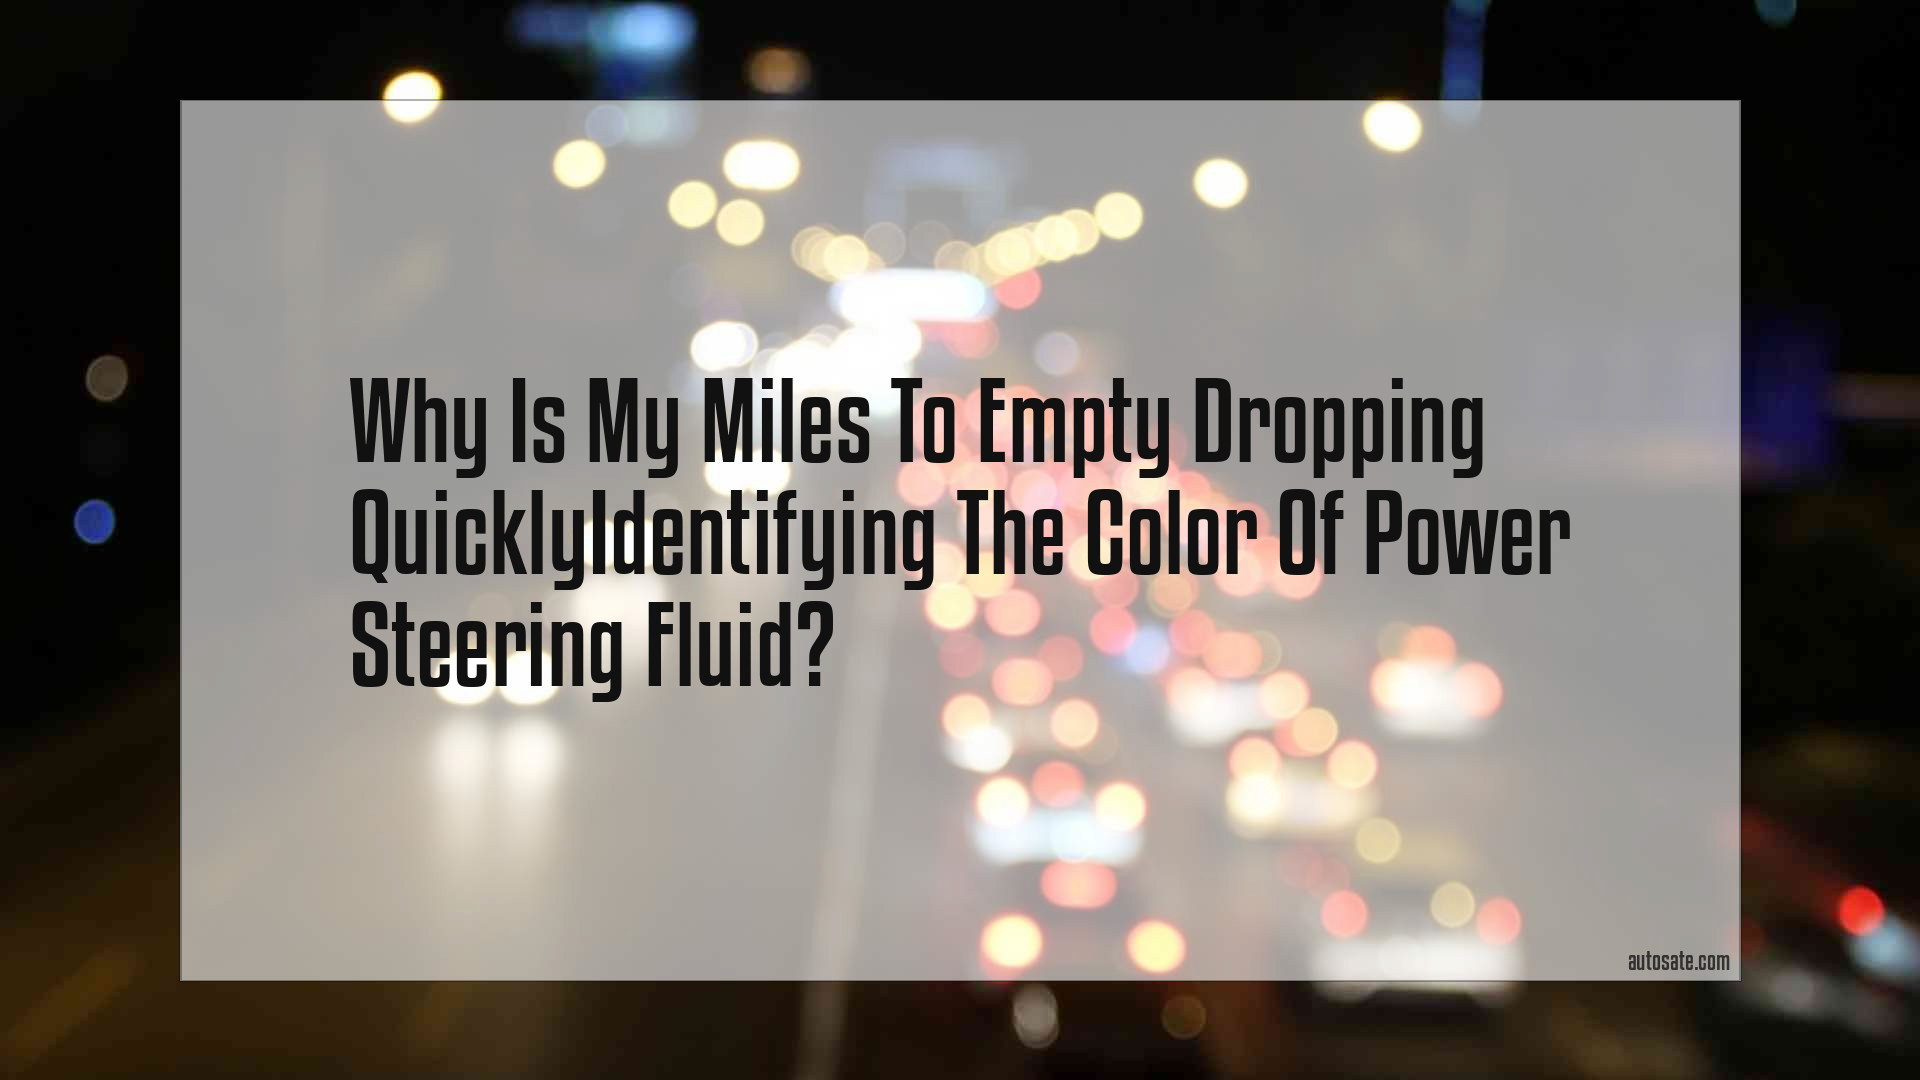 Why Is My Miles To Empty Dropping Quicklyidentifying The Color Of Power Steering Fluid